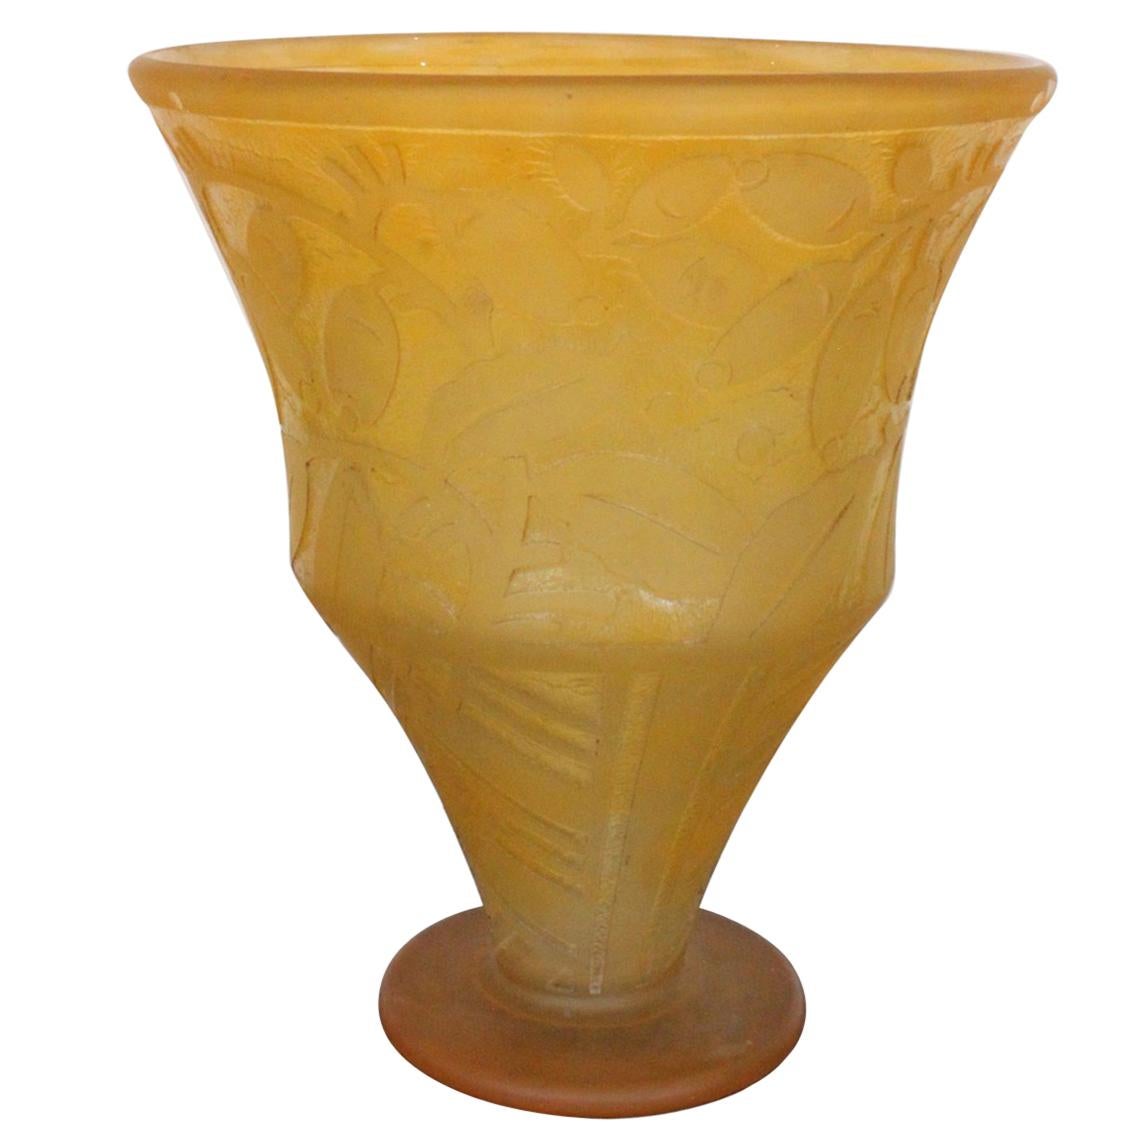 Daum Vase with Floral Pattern, 1930 For Sale